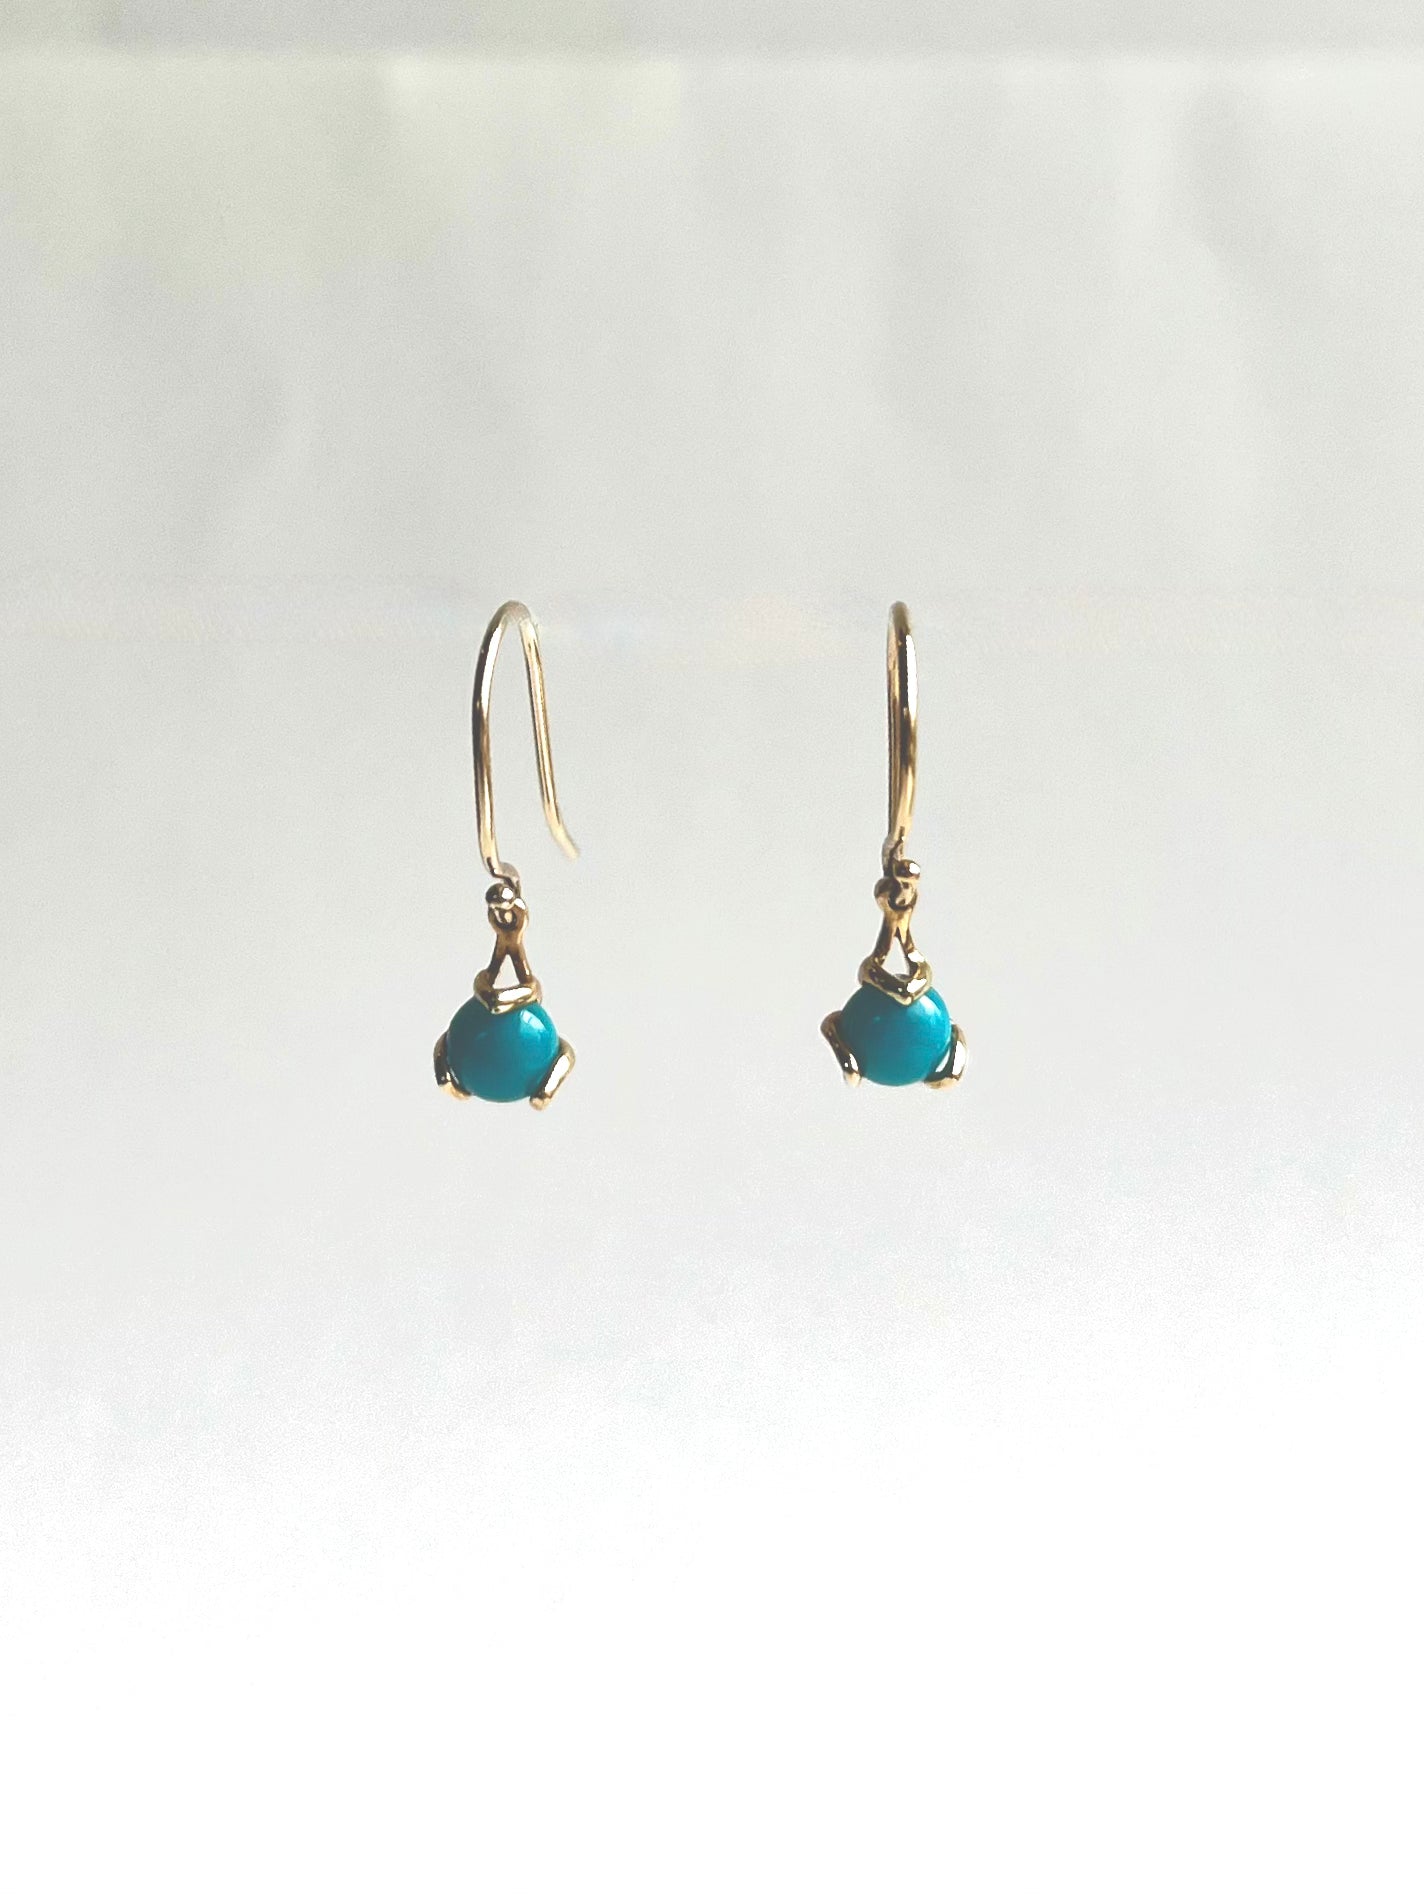 Turquoise set in 14k yellow gold Fiore Drop Earrings by Hannah Daye original design 